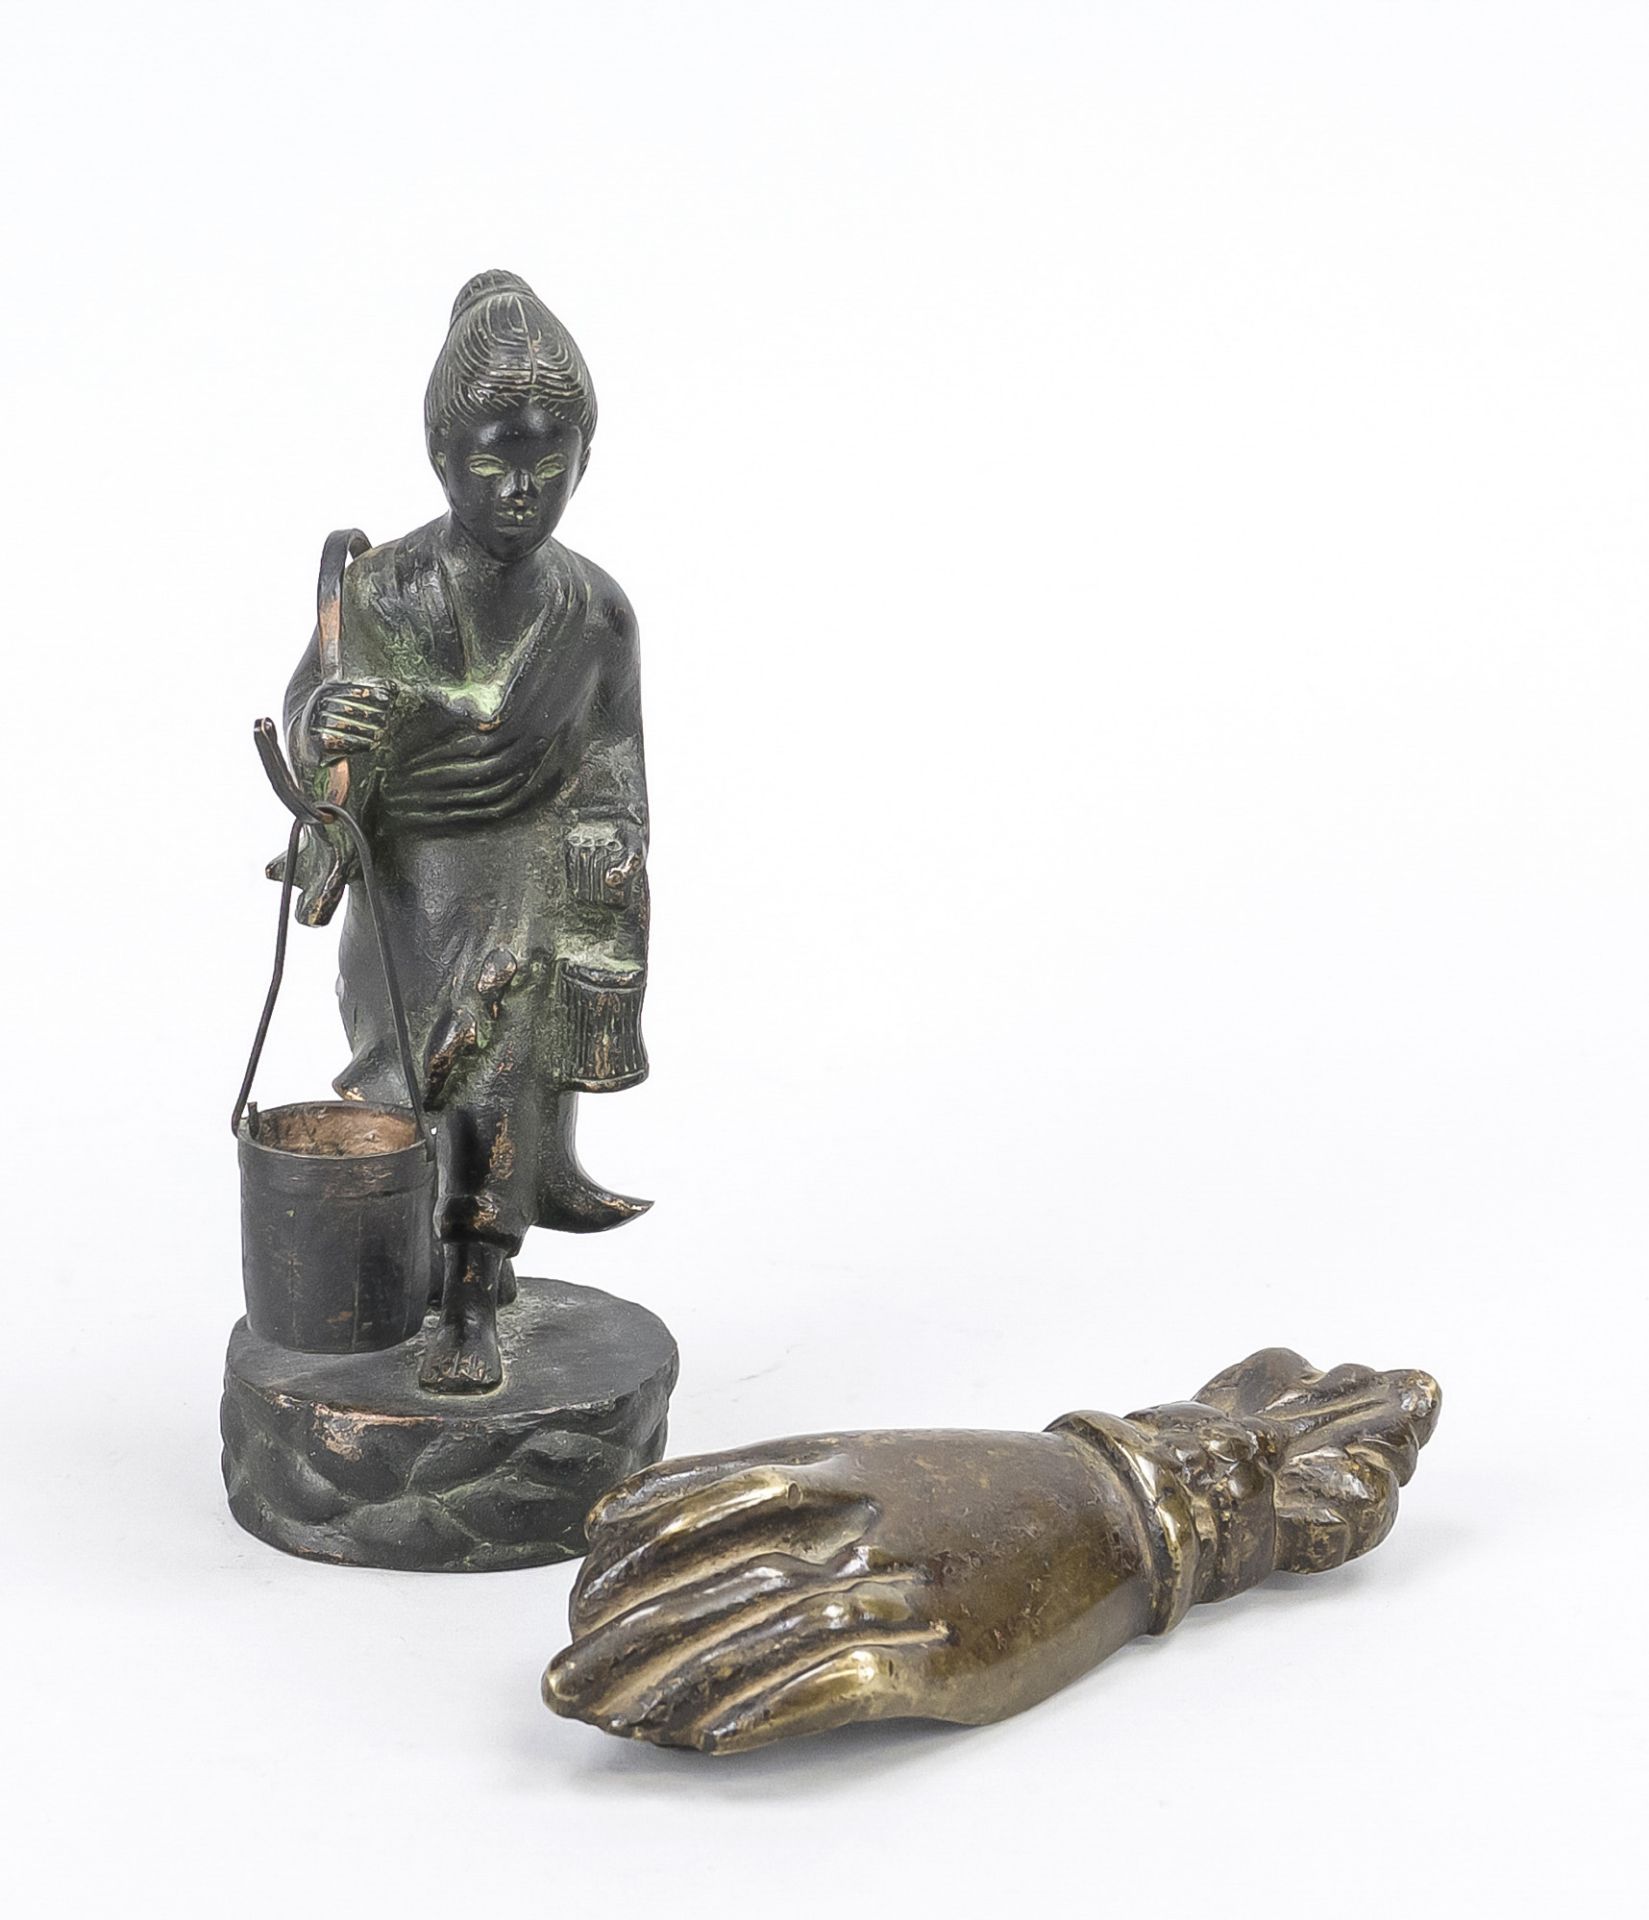 Peasant woman/water carrier, China, 19th/20th century, bronze. Striding on a terrain plinth, the